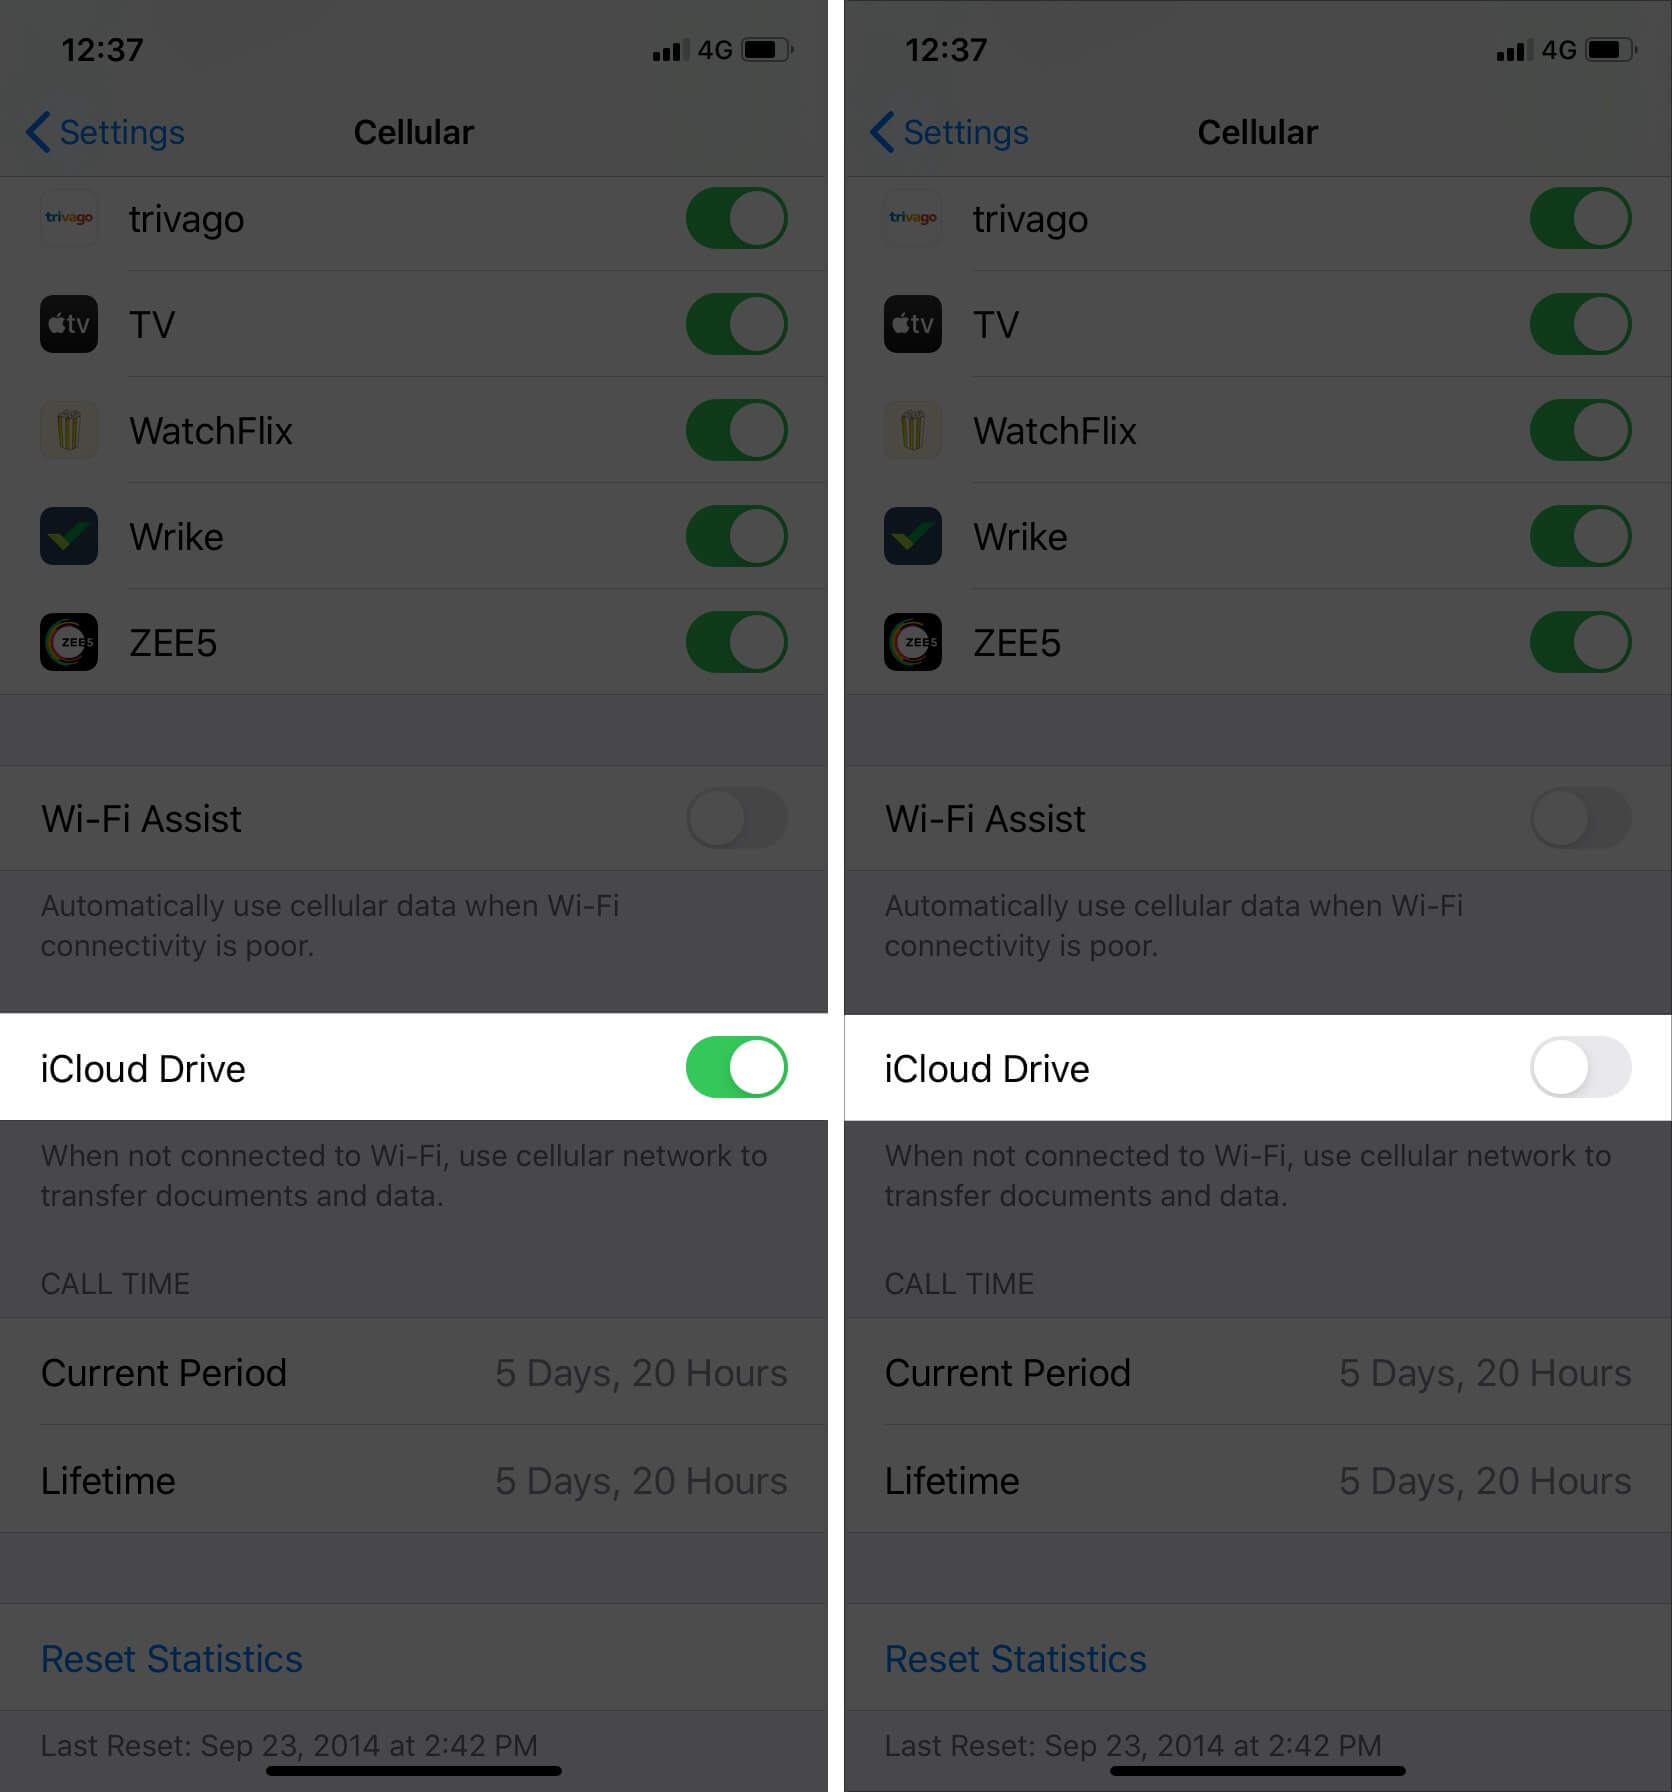 Disable cellular data for iCloud Drive on iPhone